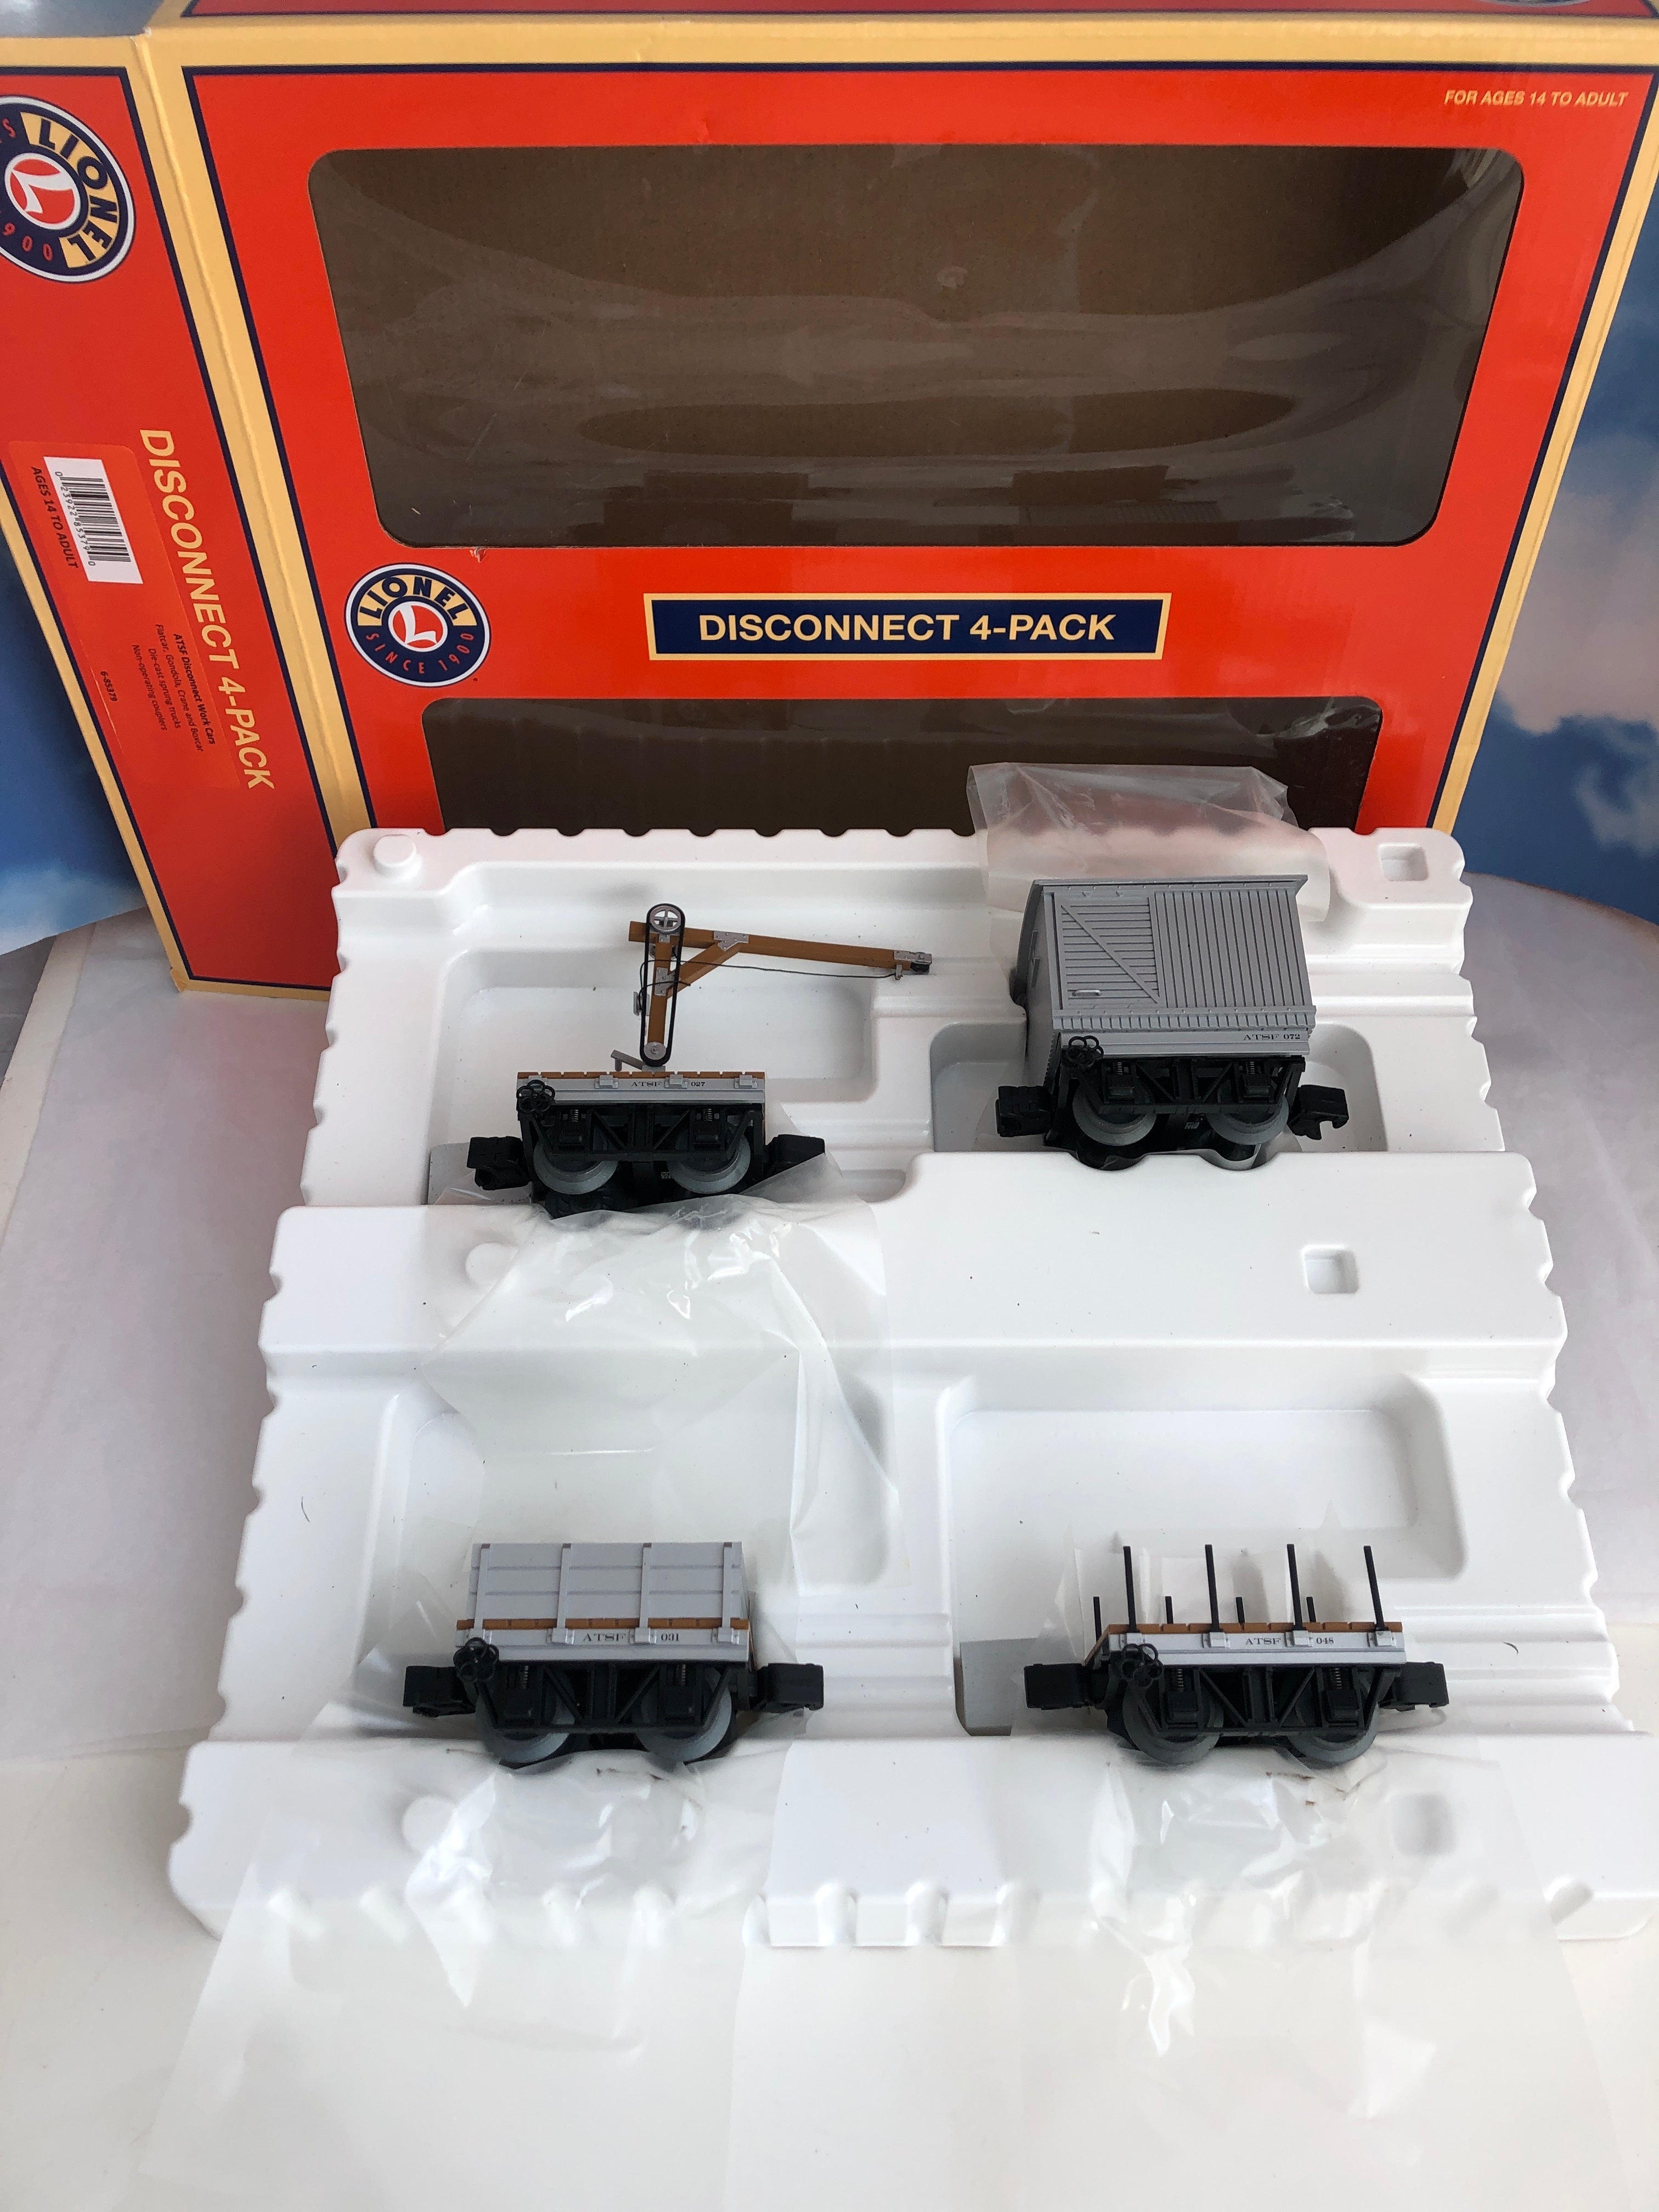 Lionel Disconnect 4 Pack